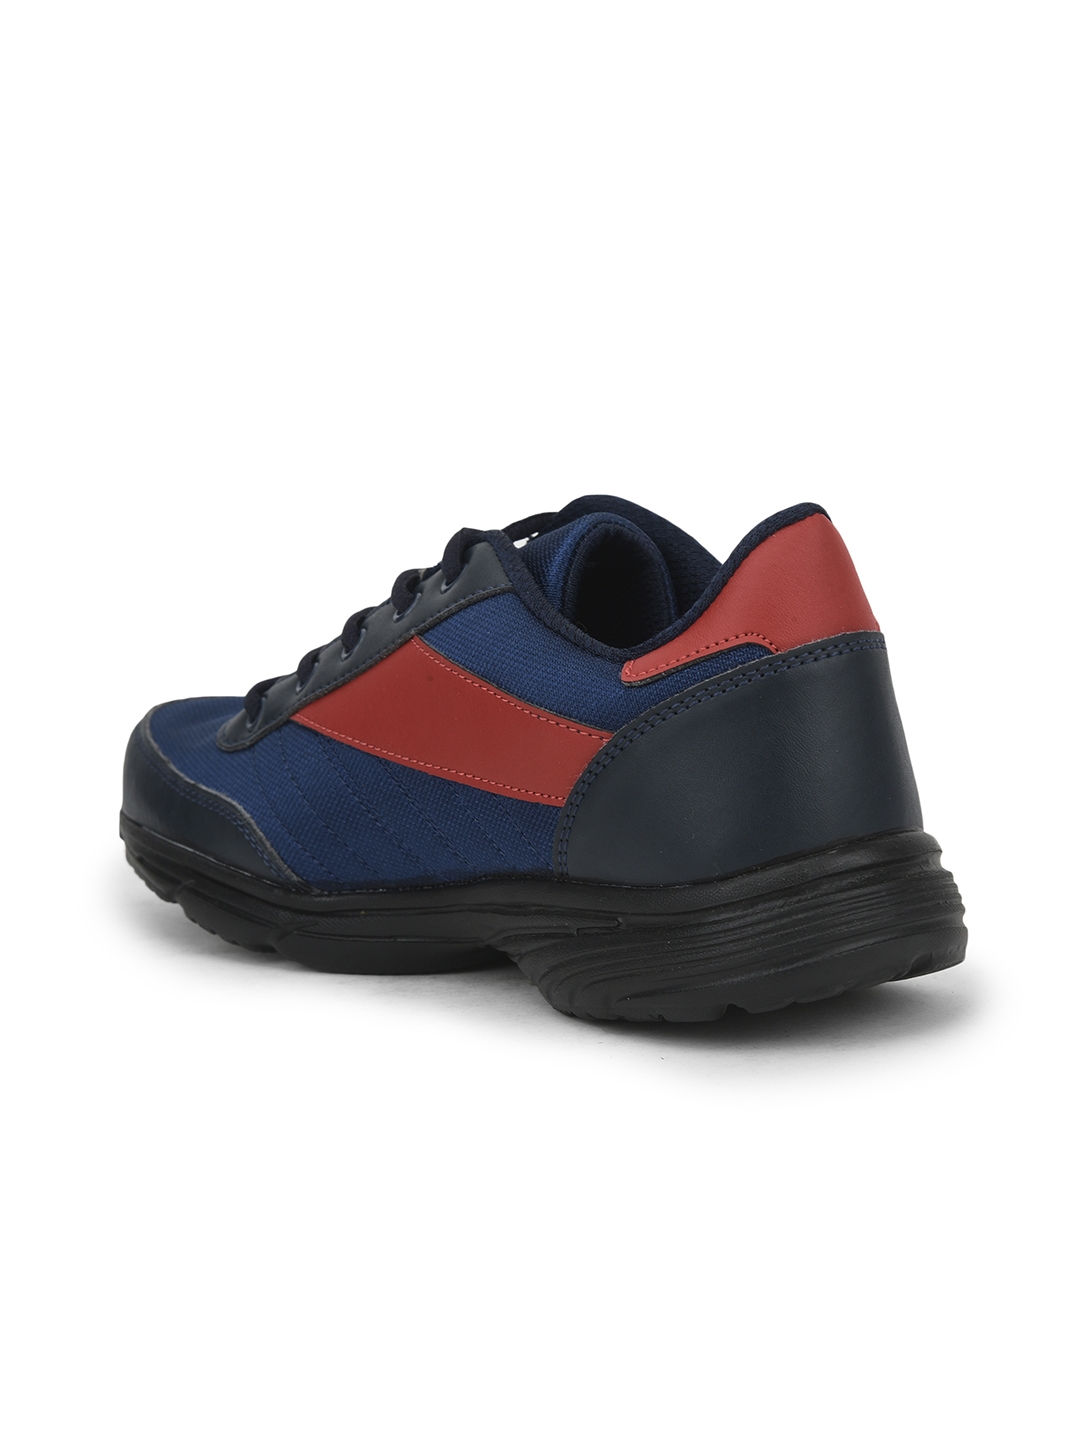 Liberty | Force 10 by Liberty RED Casual Shoes 9907-51BLU 999 For :- Men